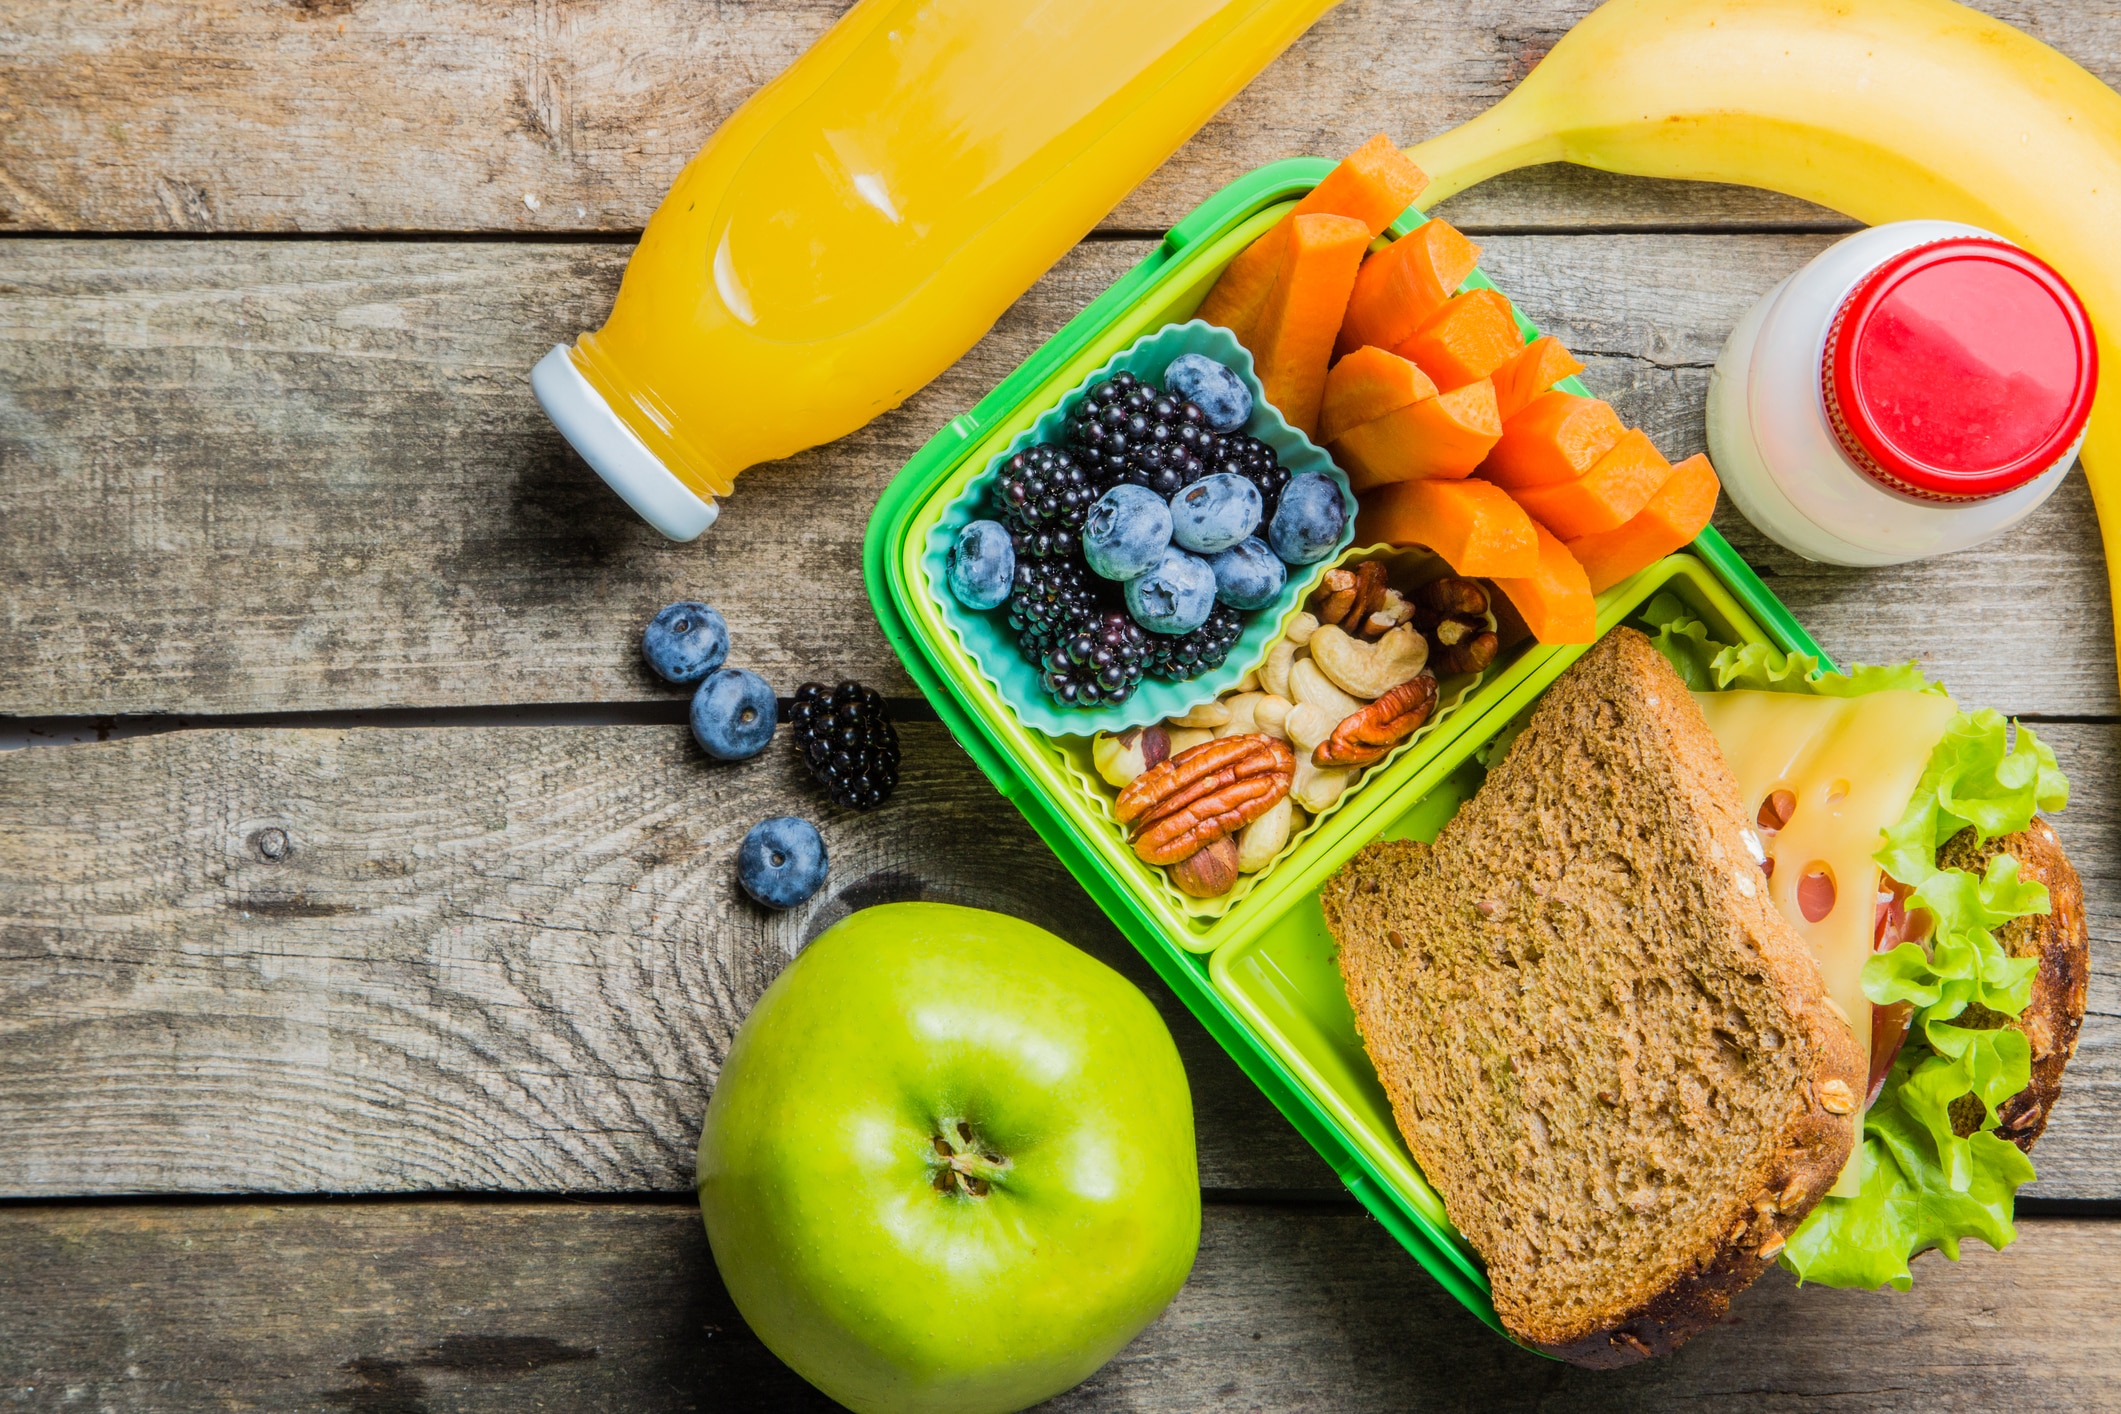 Creating Healthy School Lunches